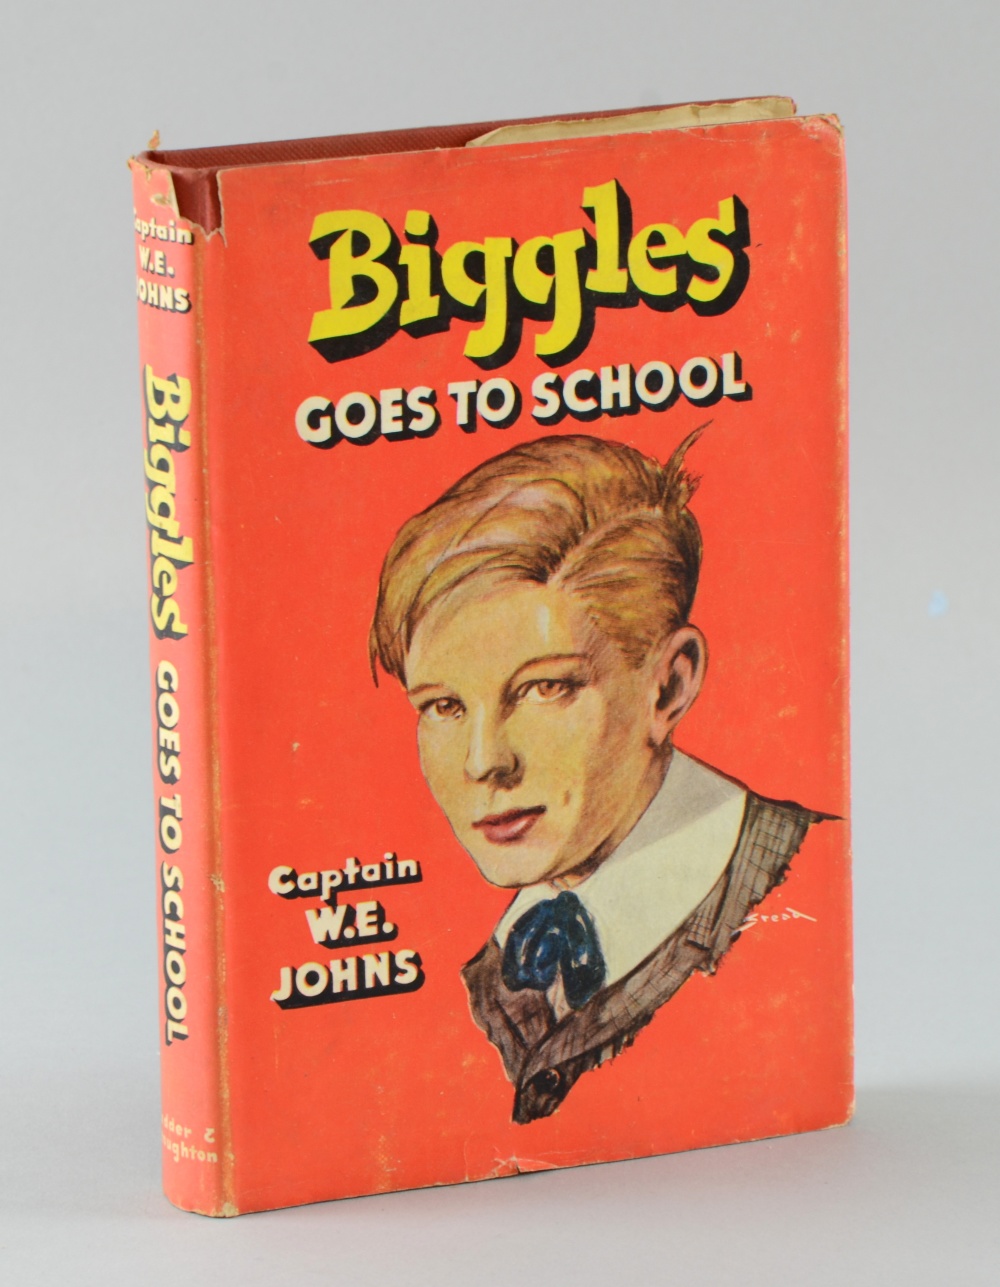 Johns: Biggles Goes to School pub. Hodder & Stoughton, 1951, First Edition, with dust-wrapper